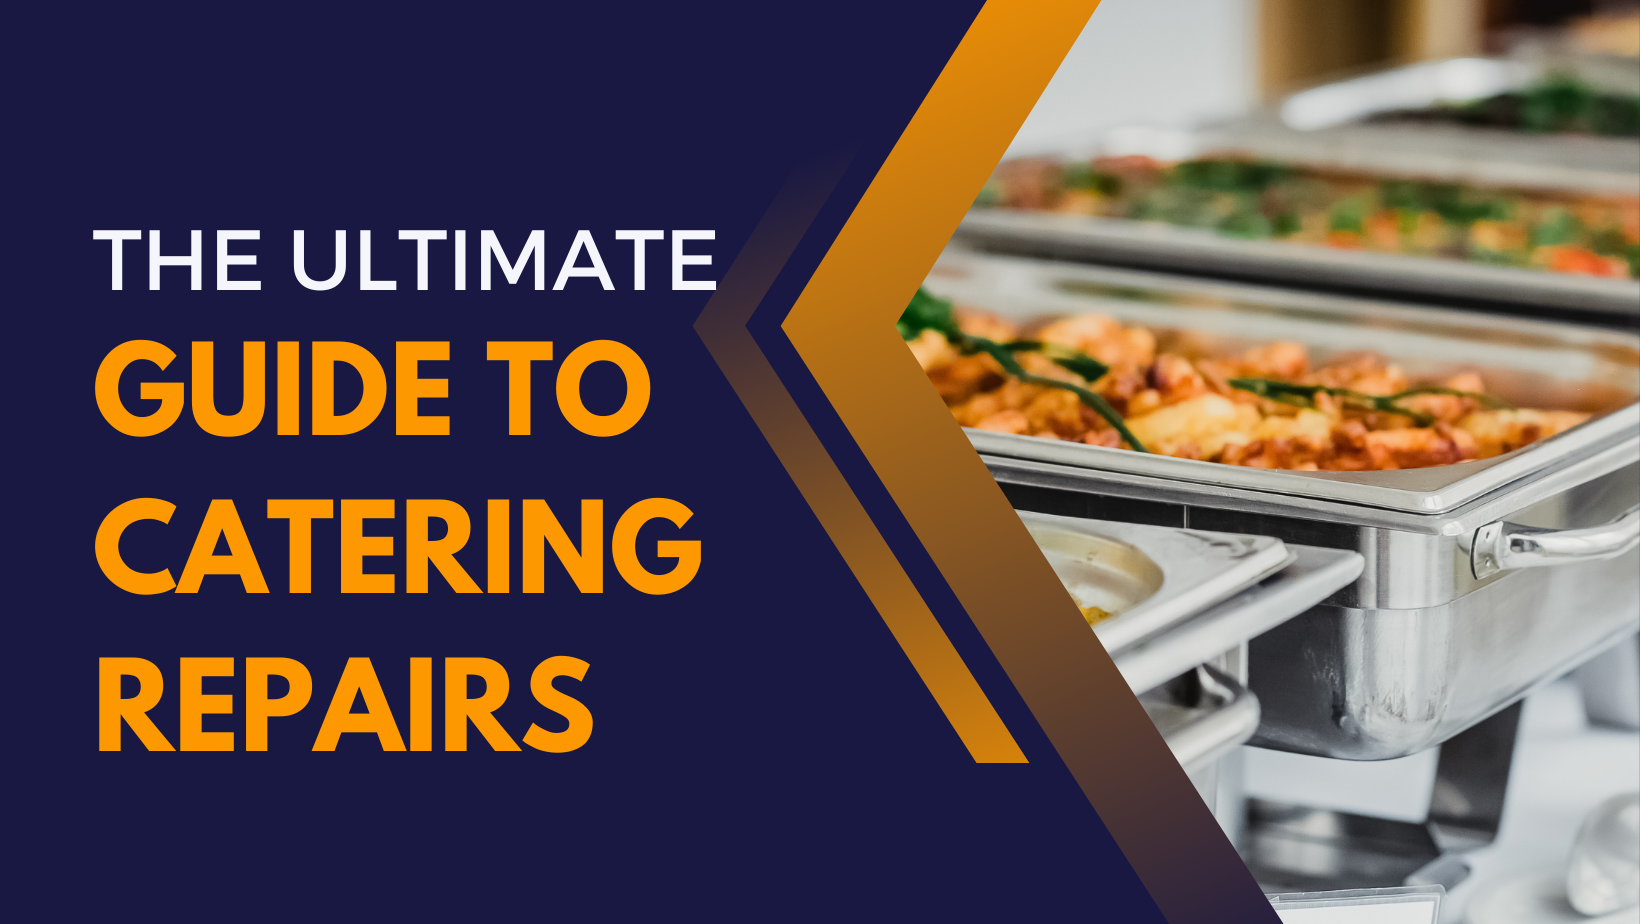 The Ultimate Guide to Catering Repairs